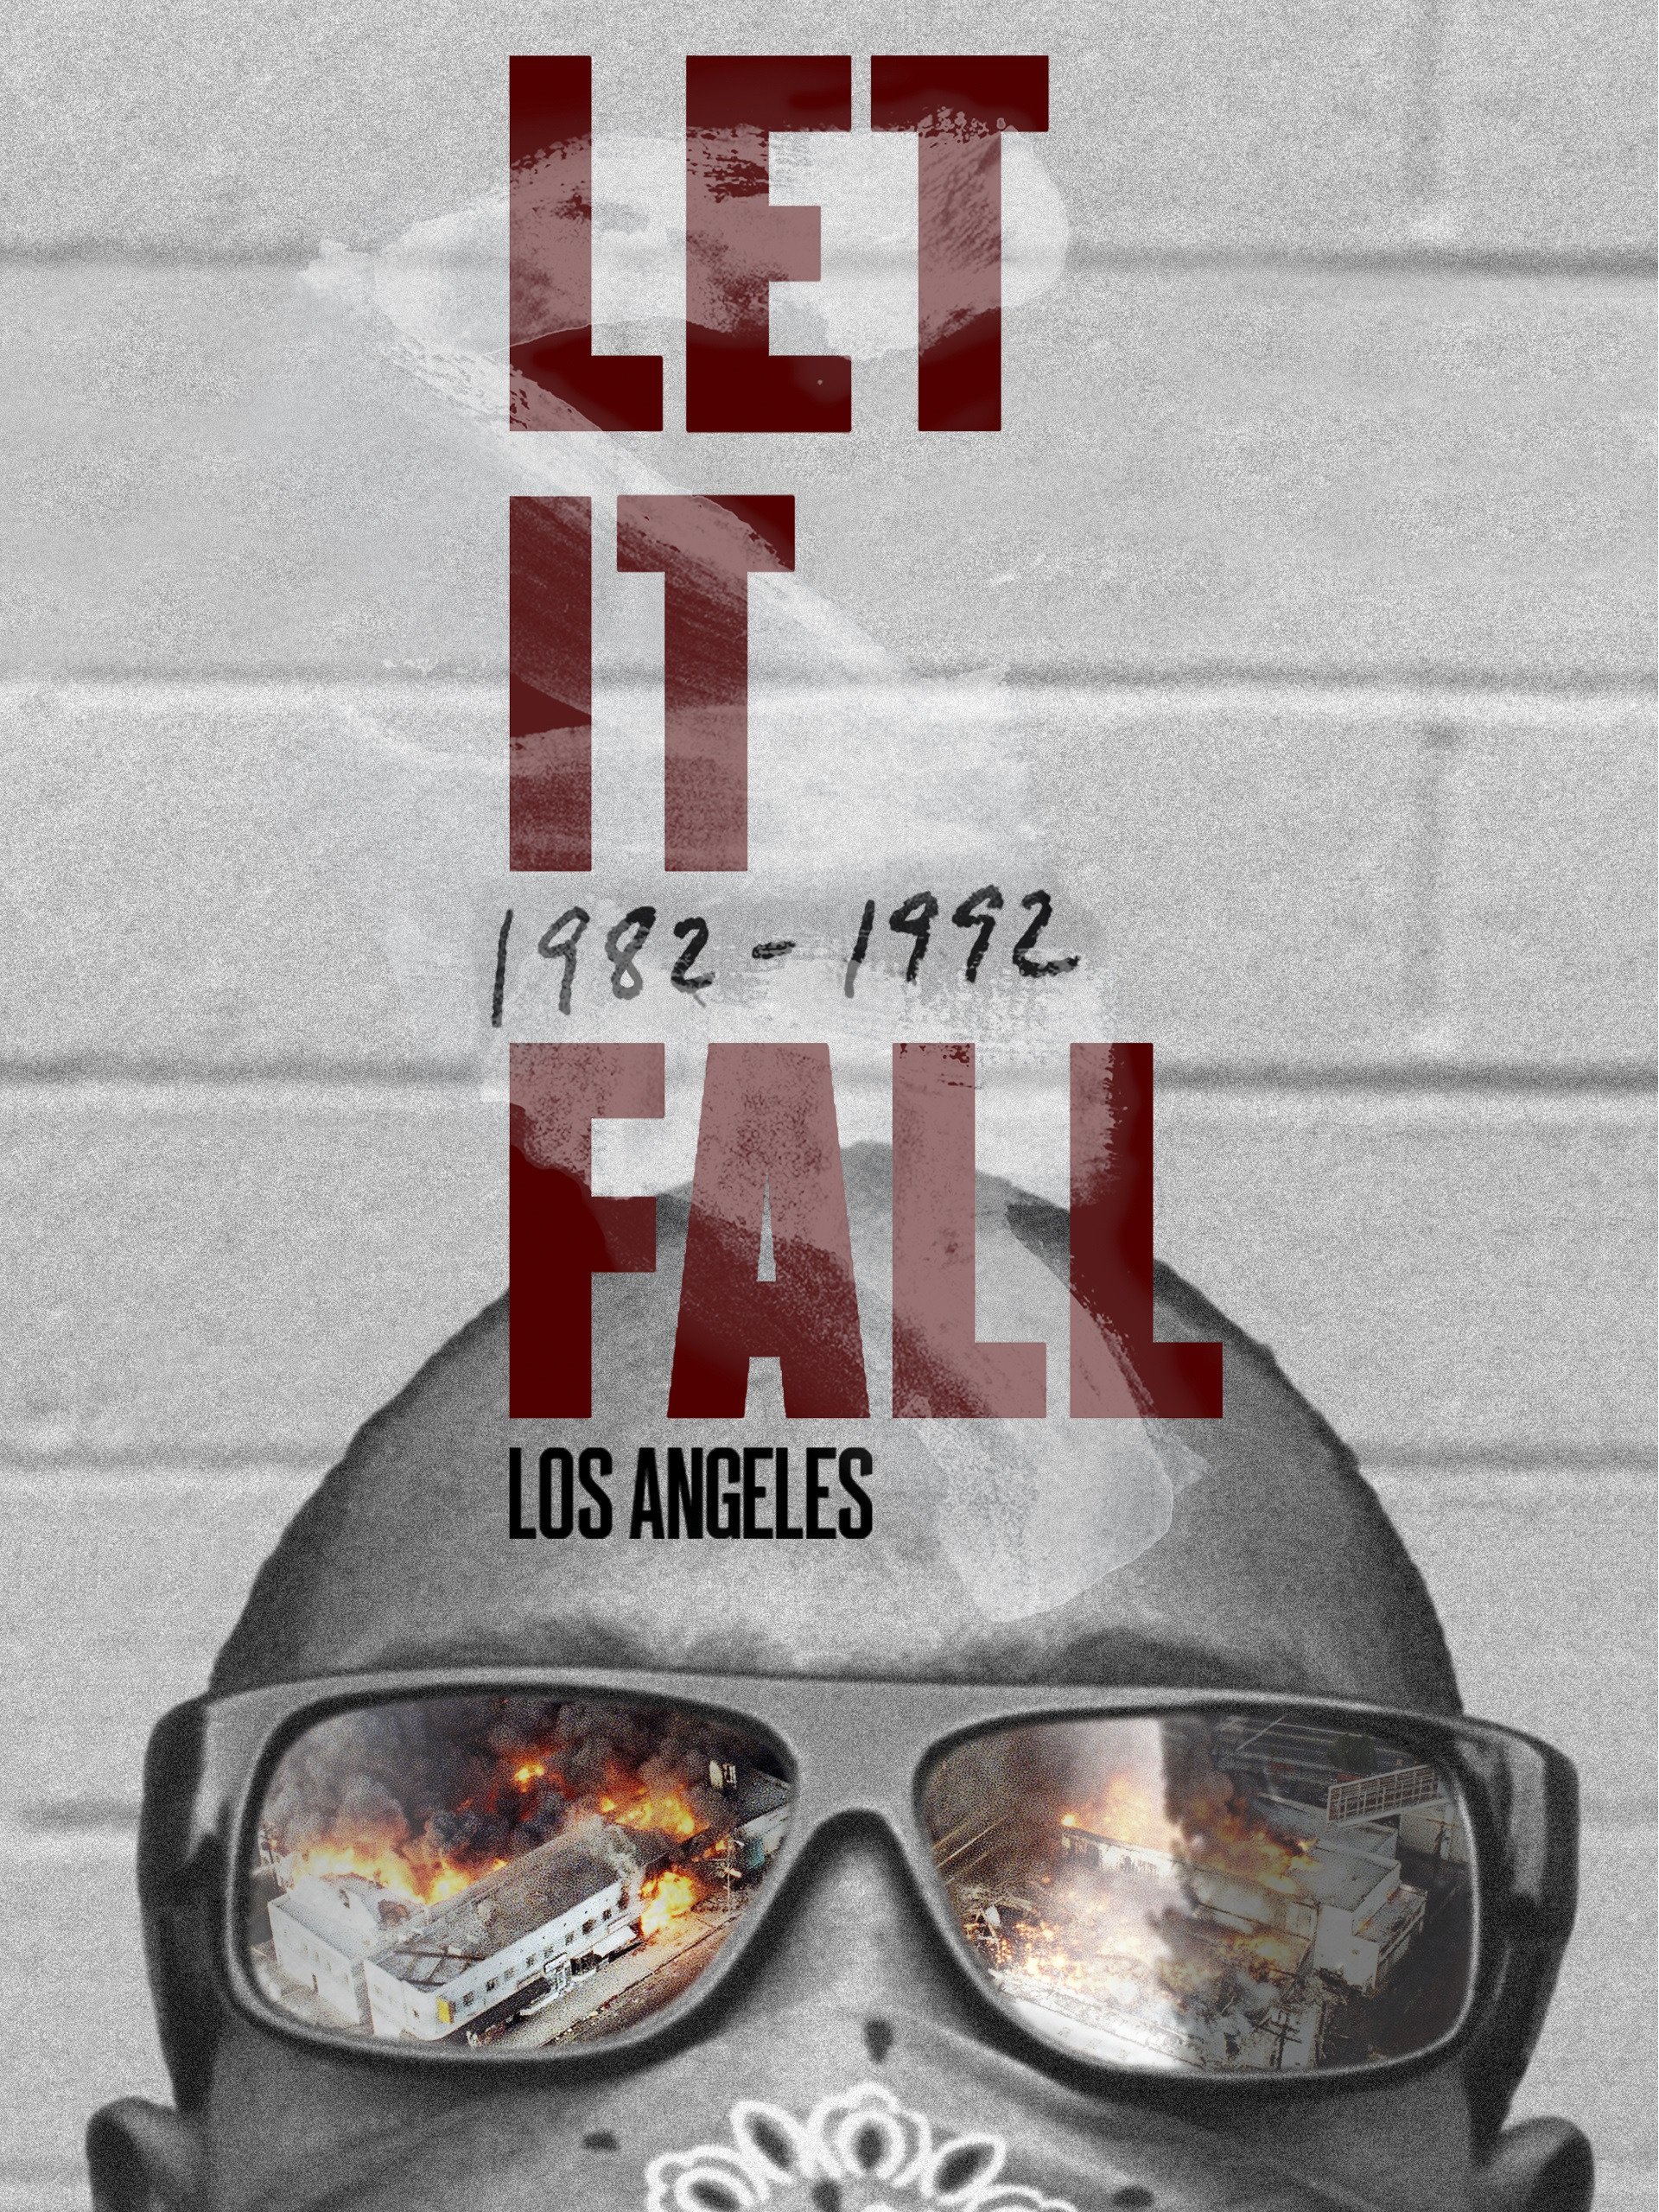 Amazon.com: Let it Fall: Los Angeles 1982-1992: Not Specified ...